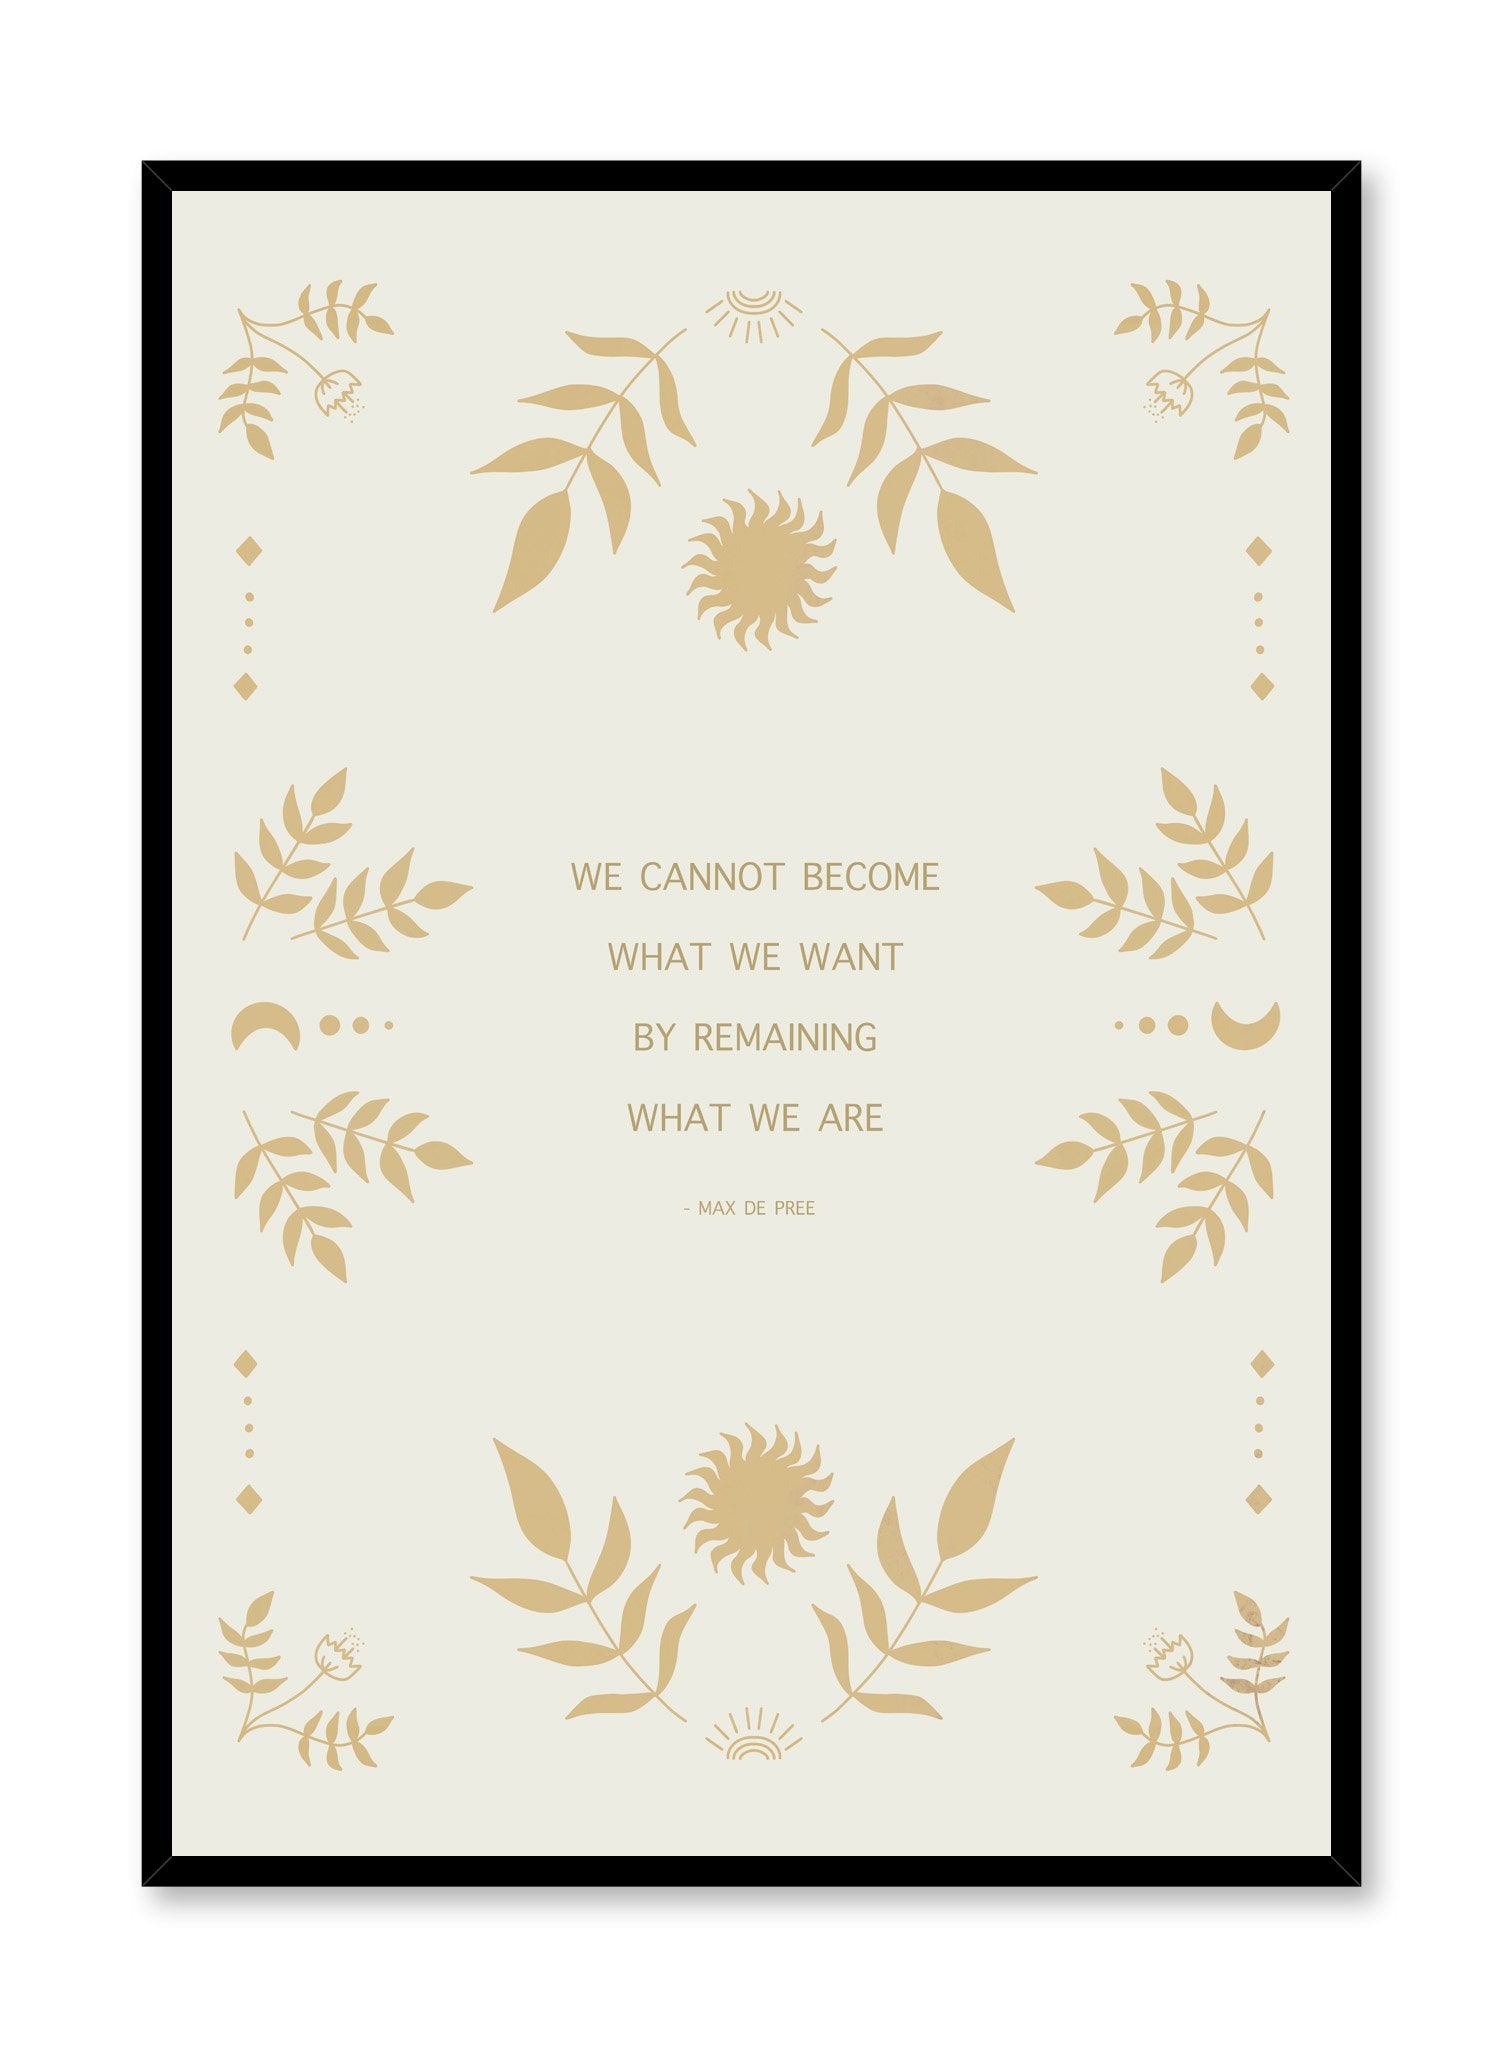 Celestial illustration poster by Opposite Wall with typography quote Growth